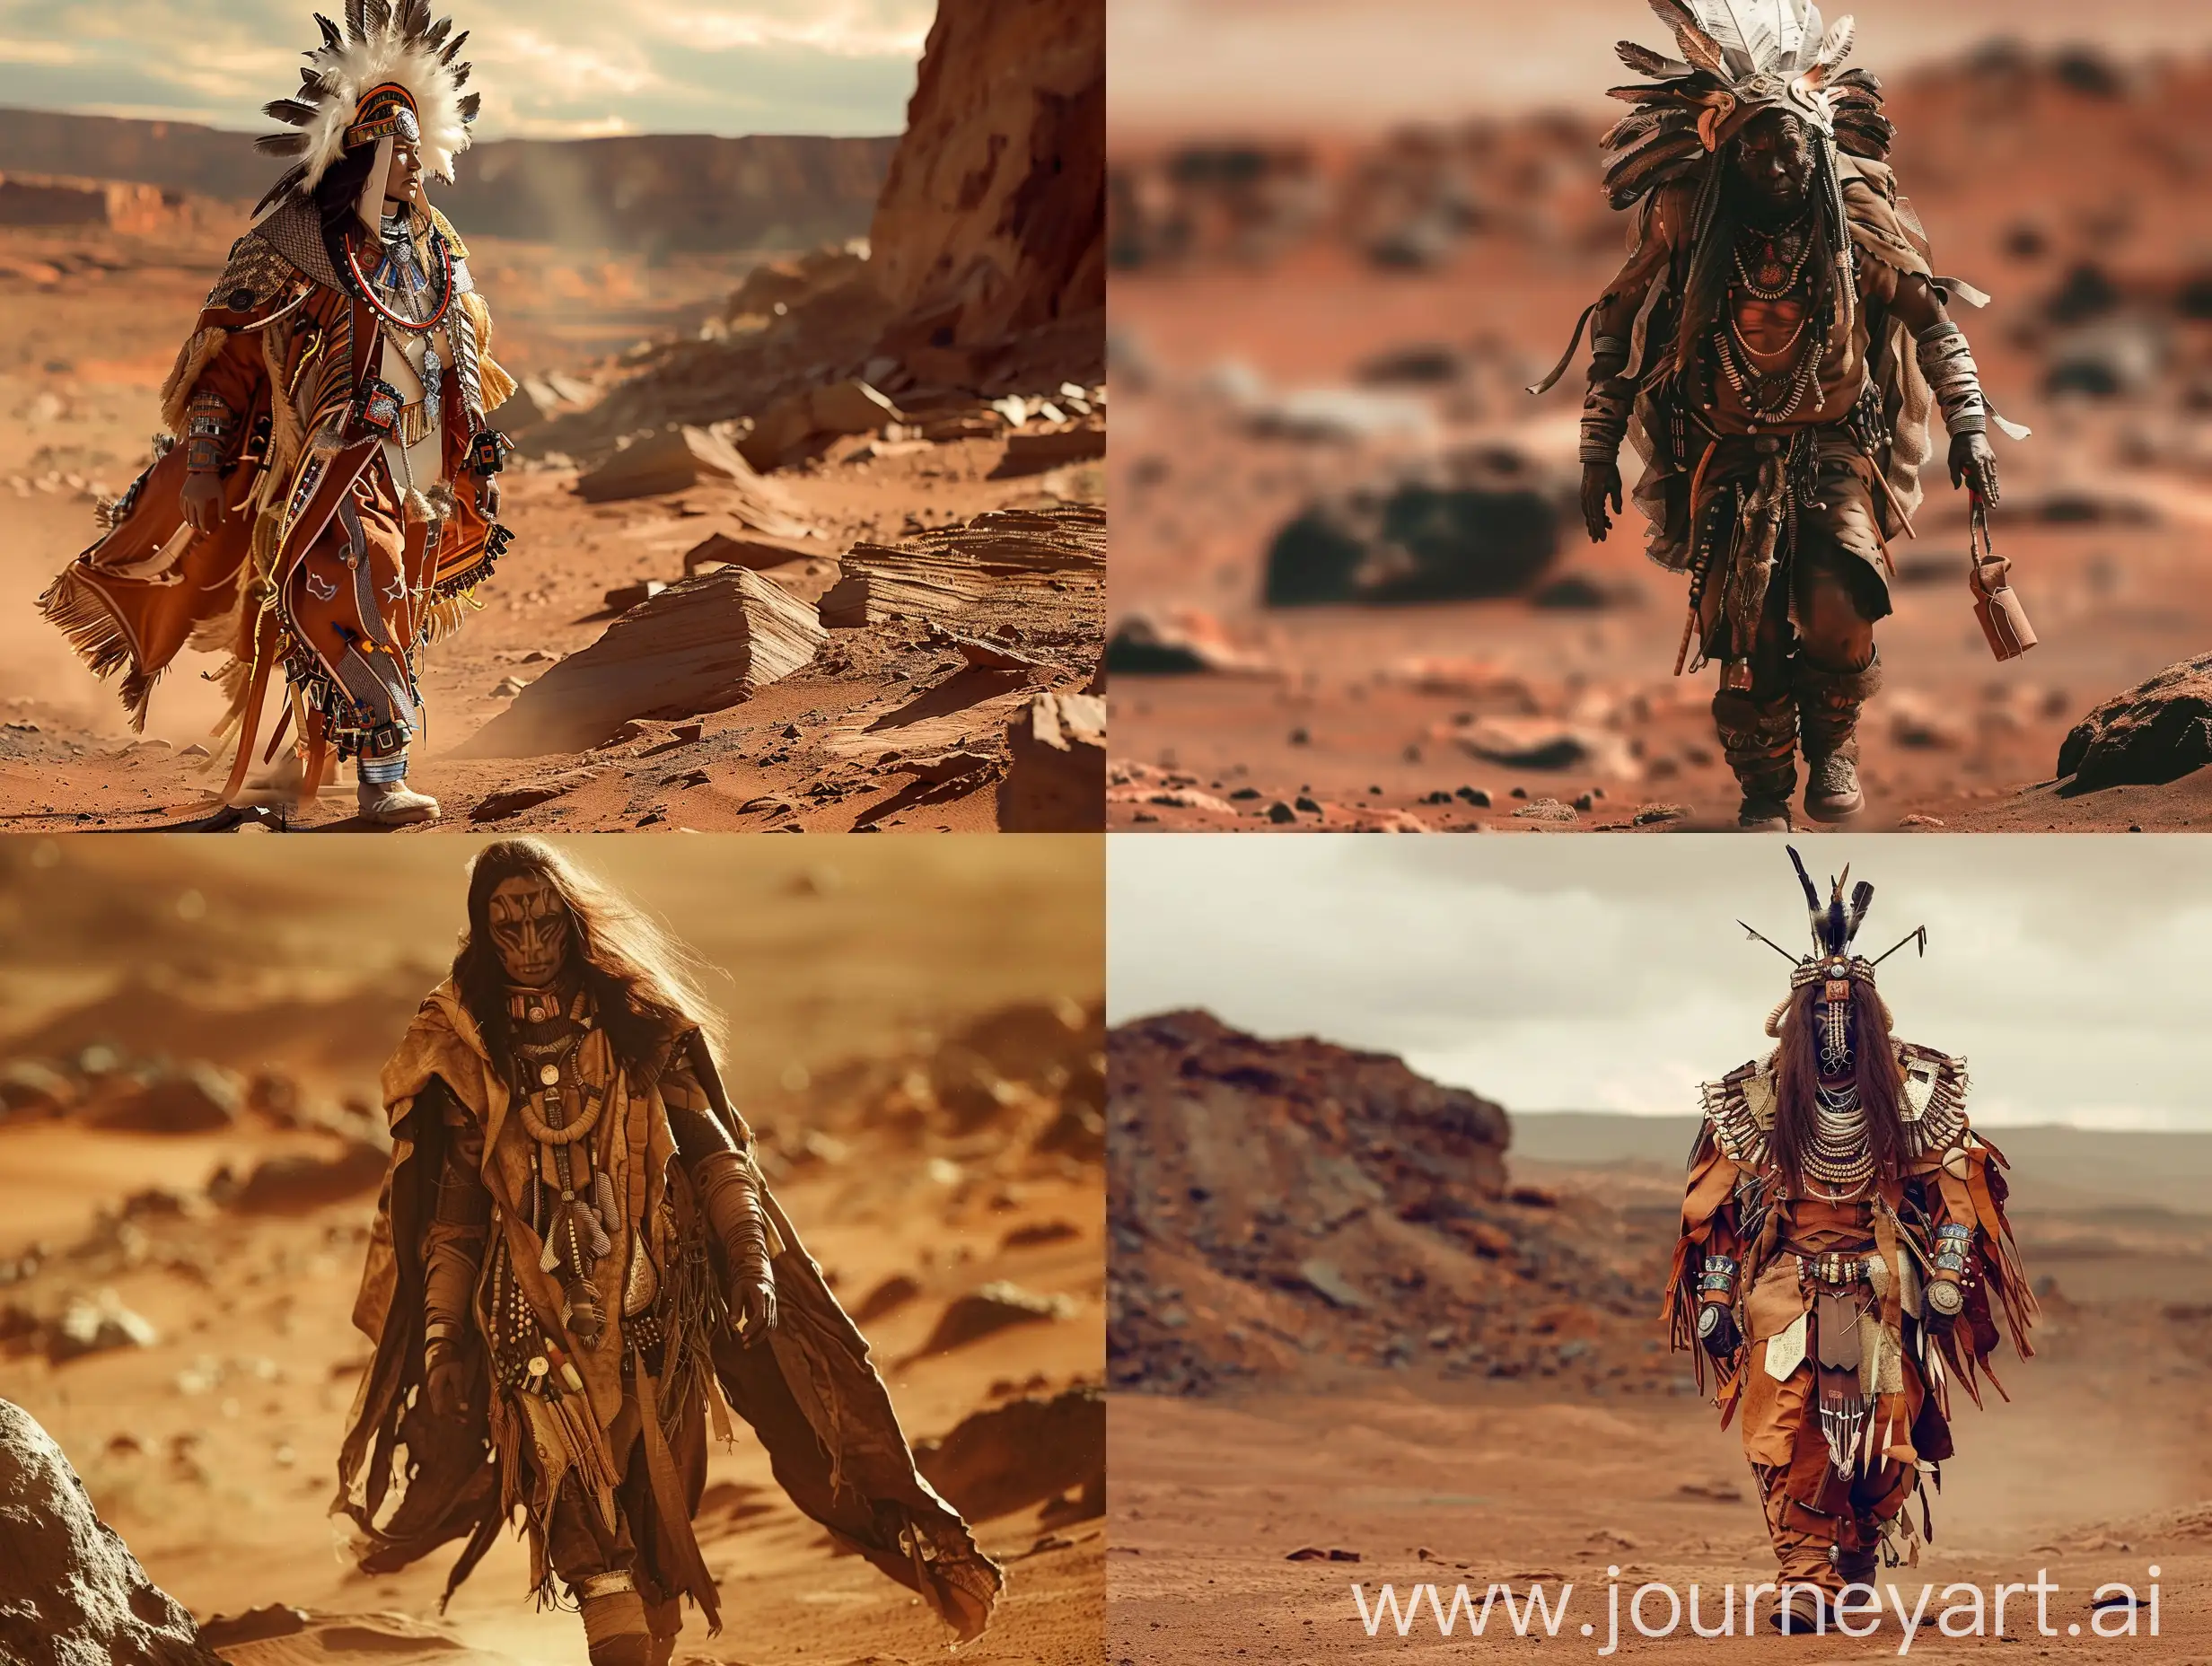 Altaic-Shaman-Walking-on-Mars-Surface-in-Full-Shamanic-Outfit